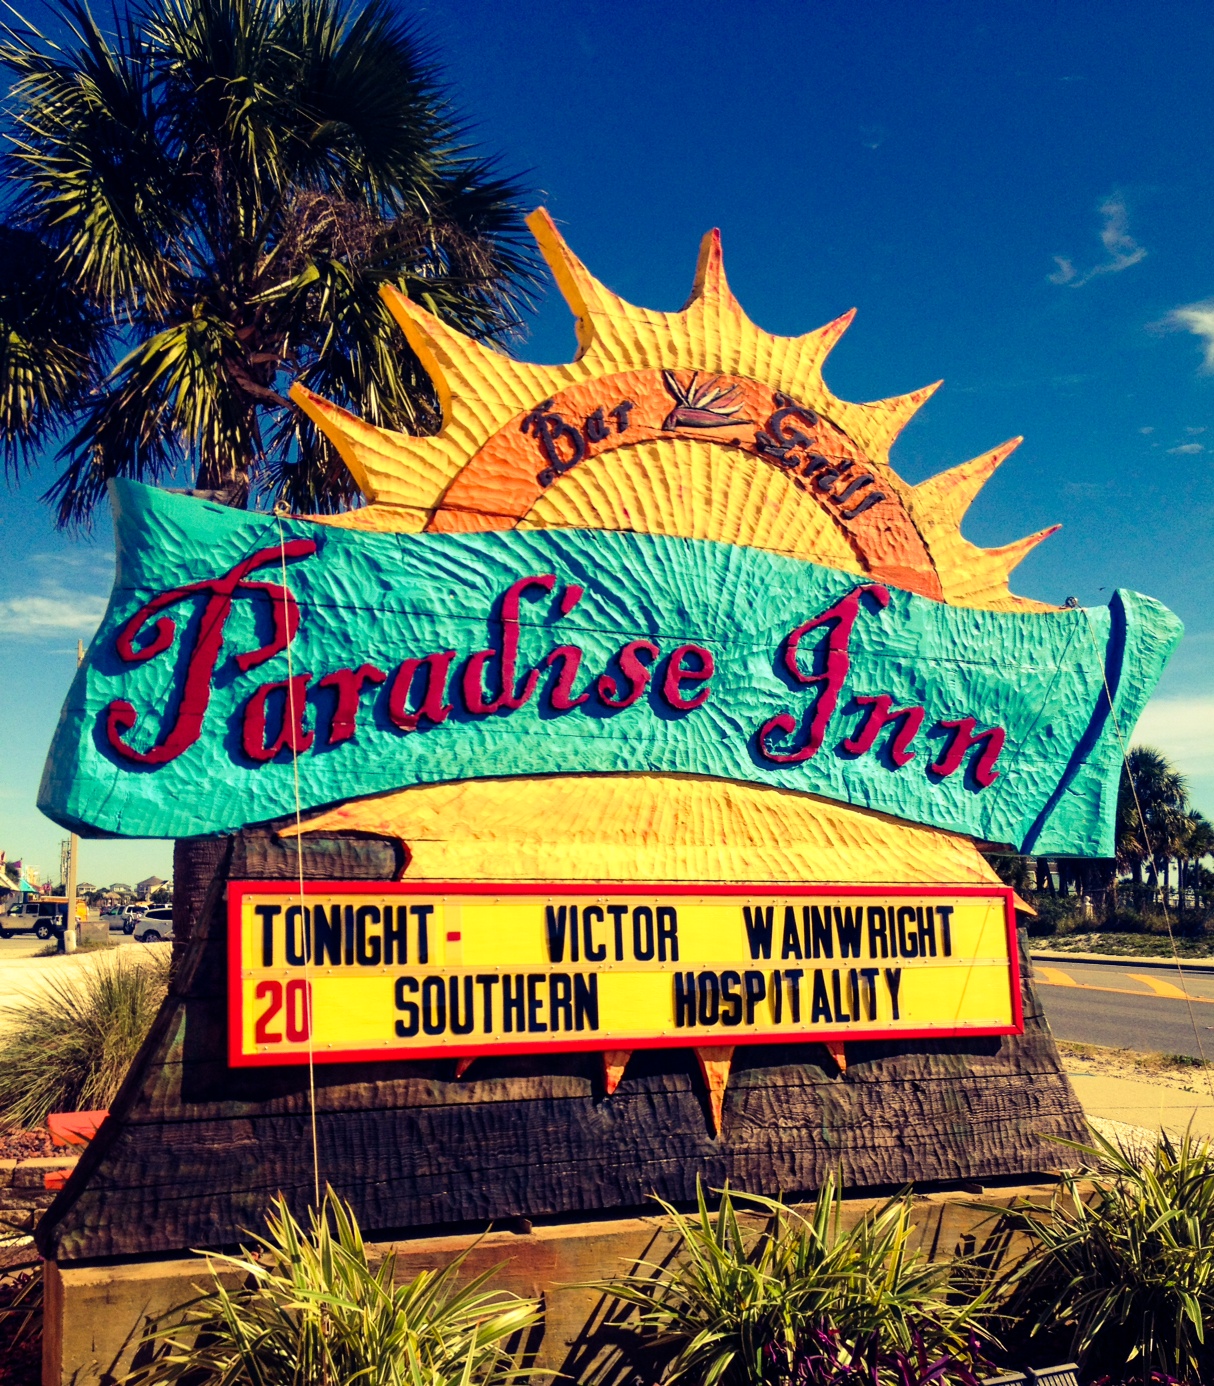 The Paradise Sign